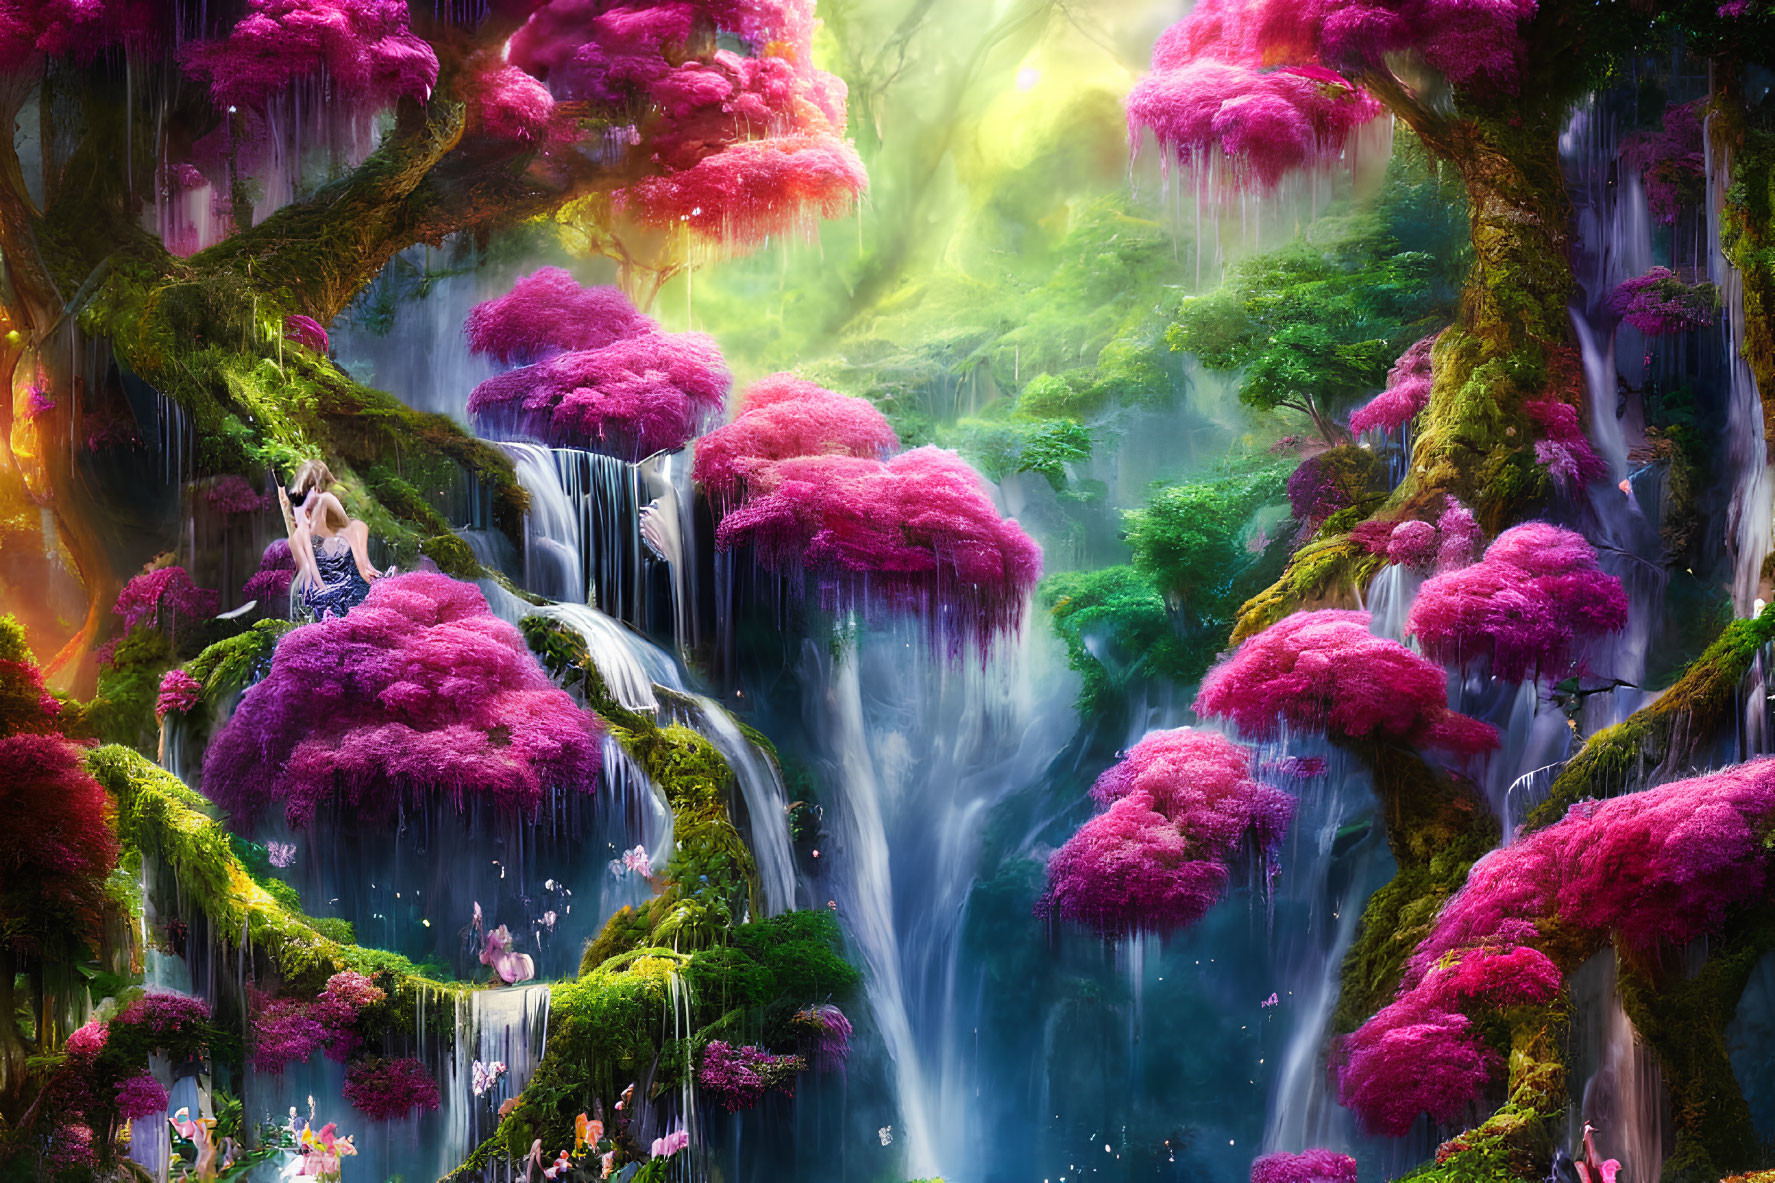 Fantasy landscape with pink foliage, waterfalls, mist, and ethereal light.